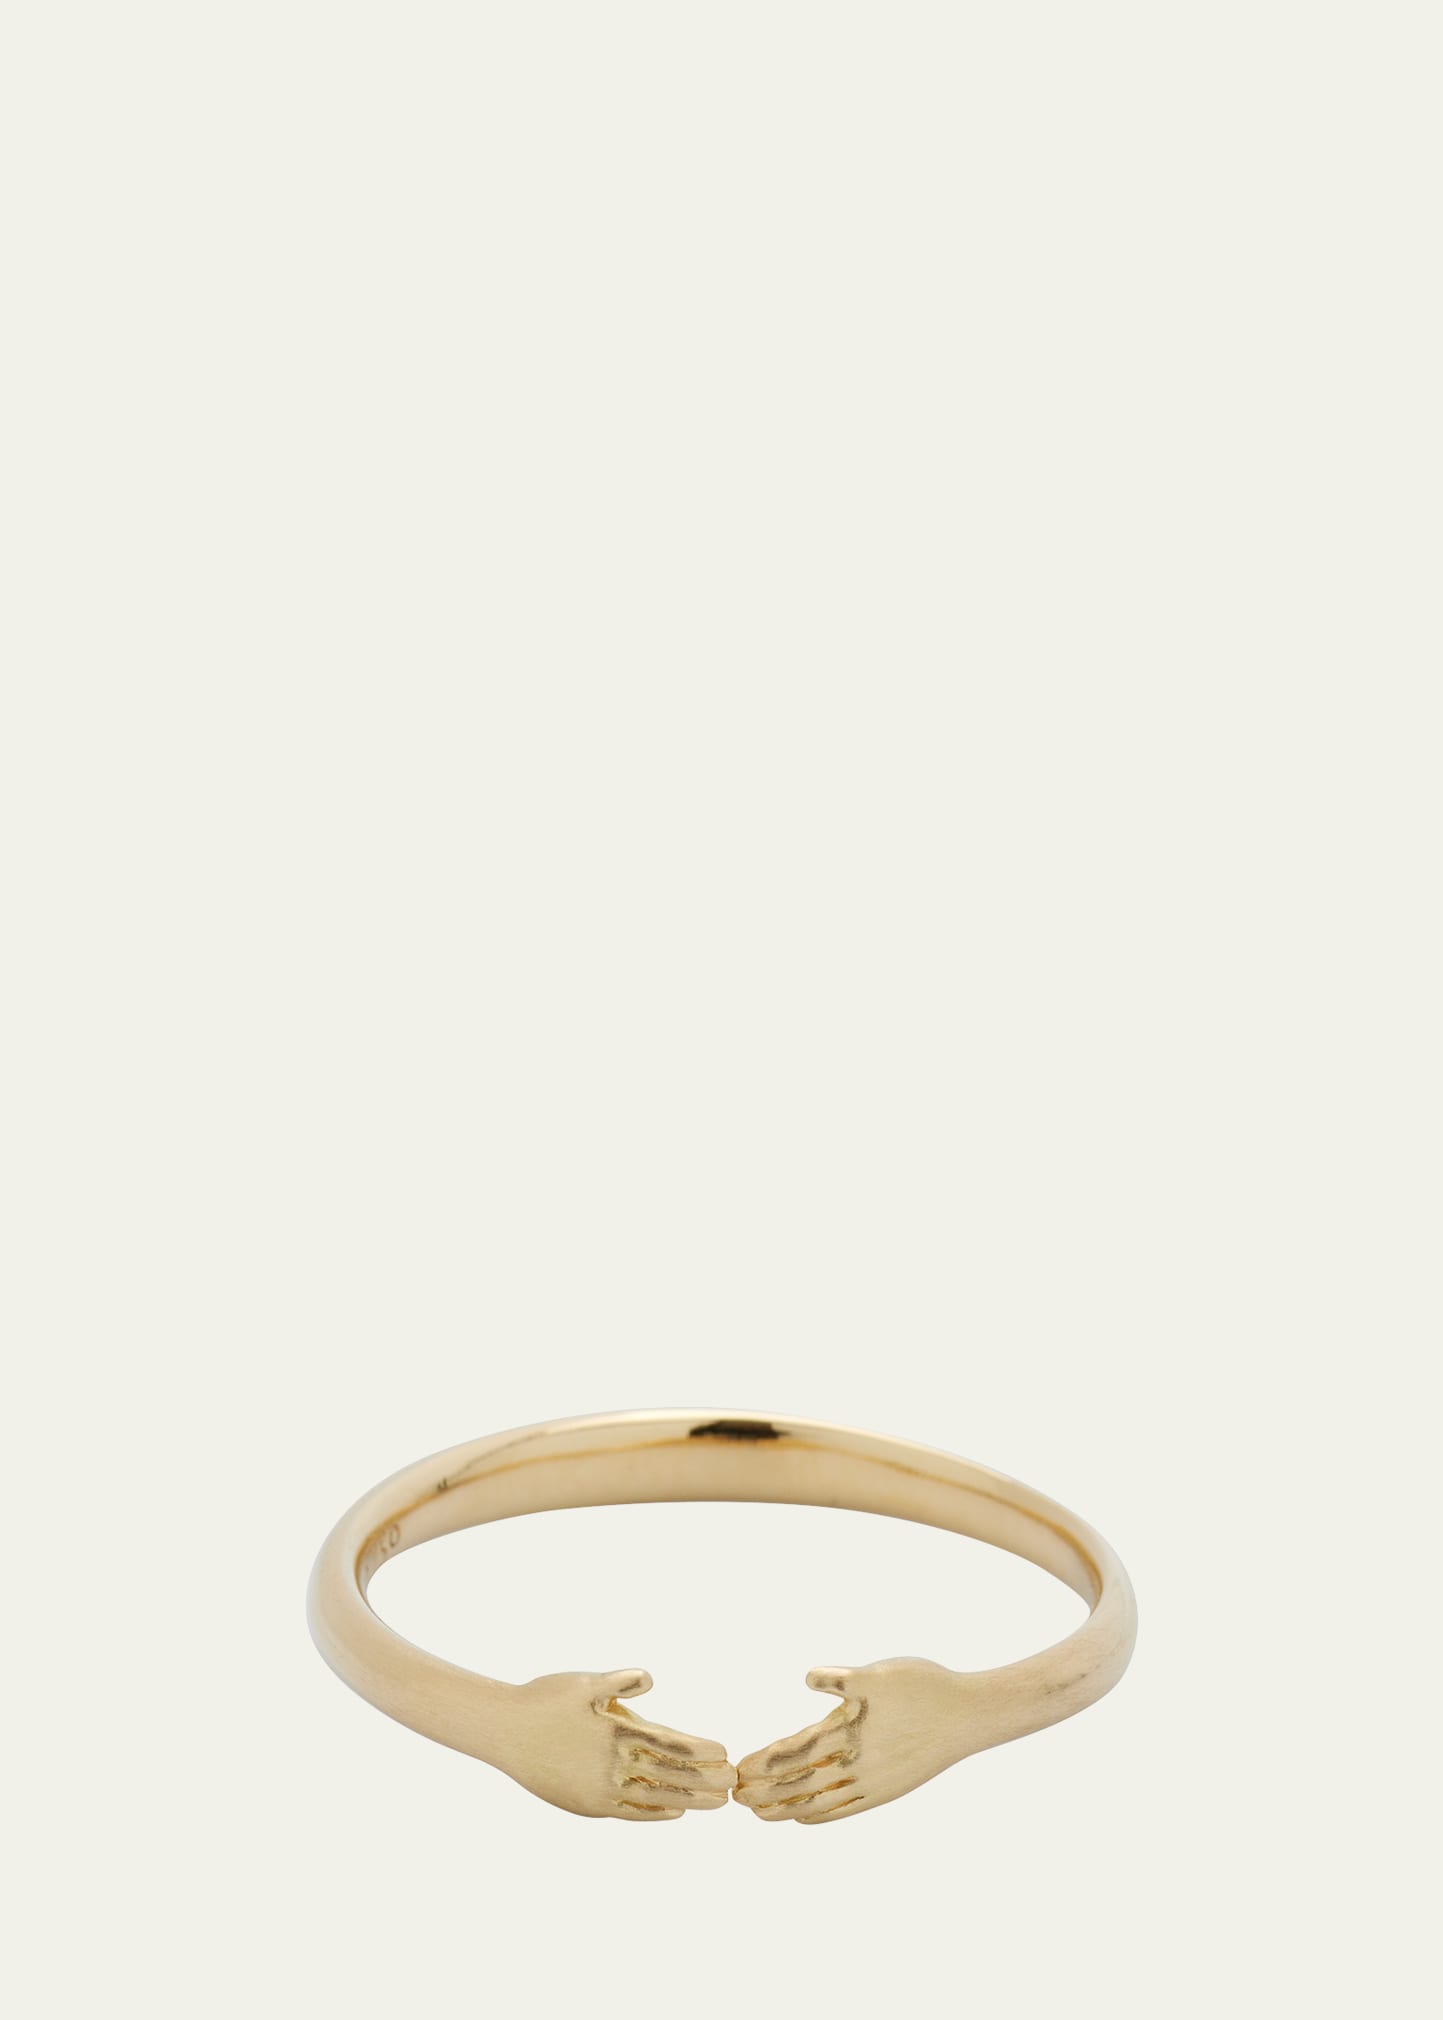 Anthony Lent Tiny Hands Ring in 18K Gold